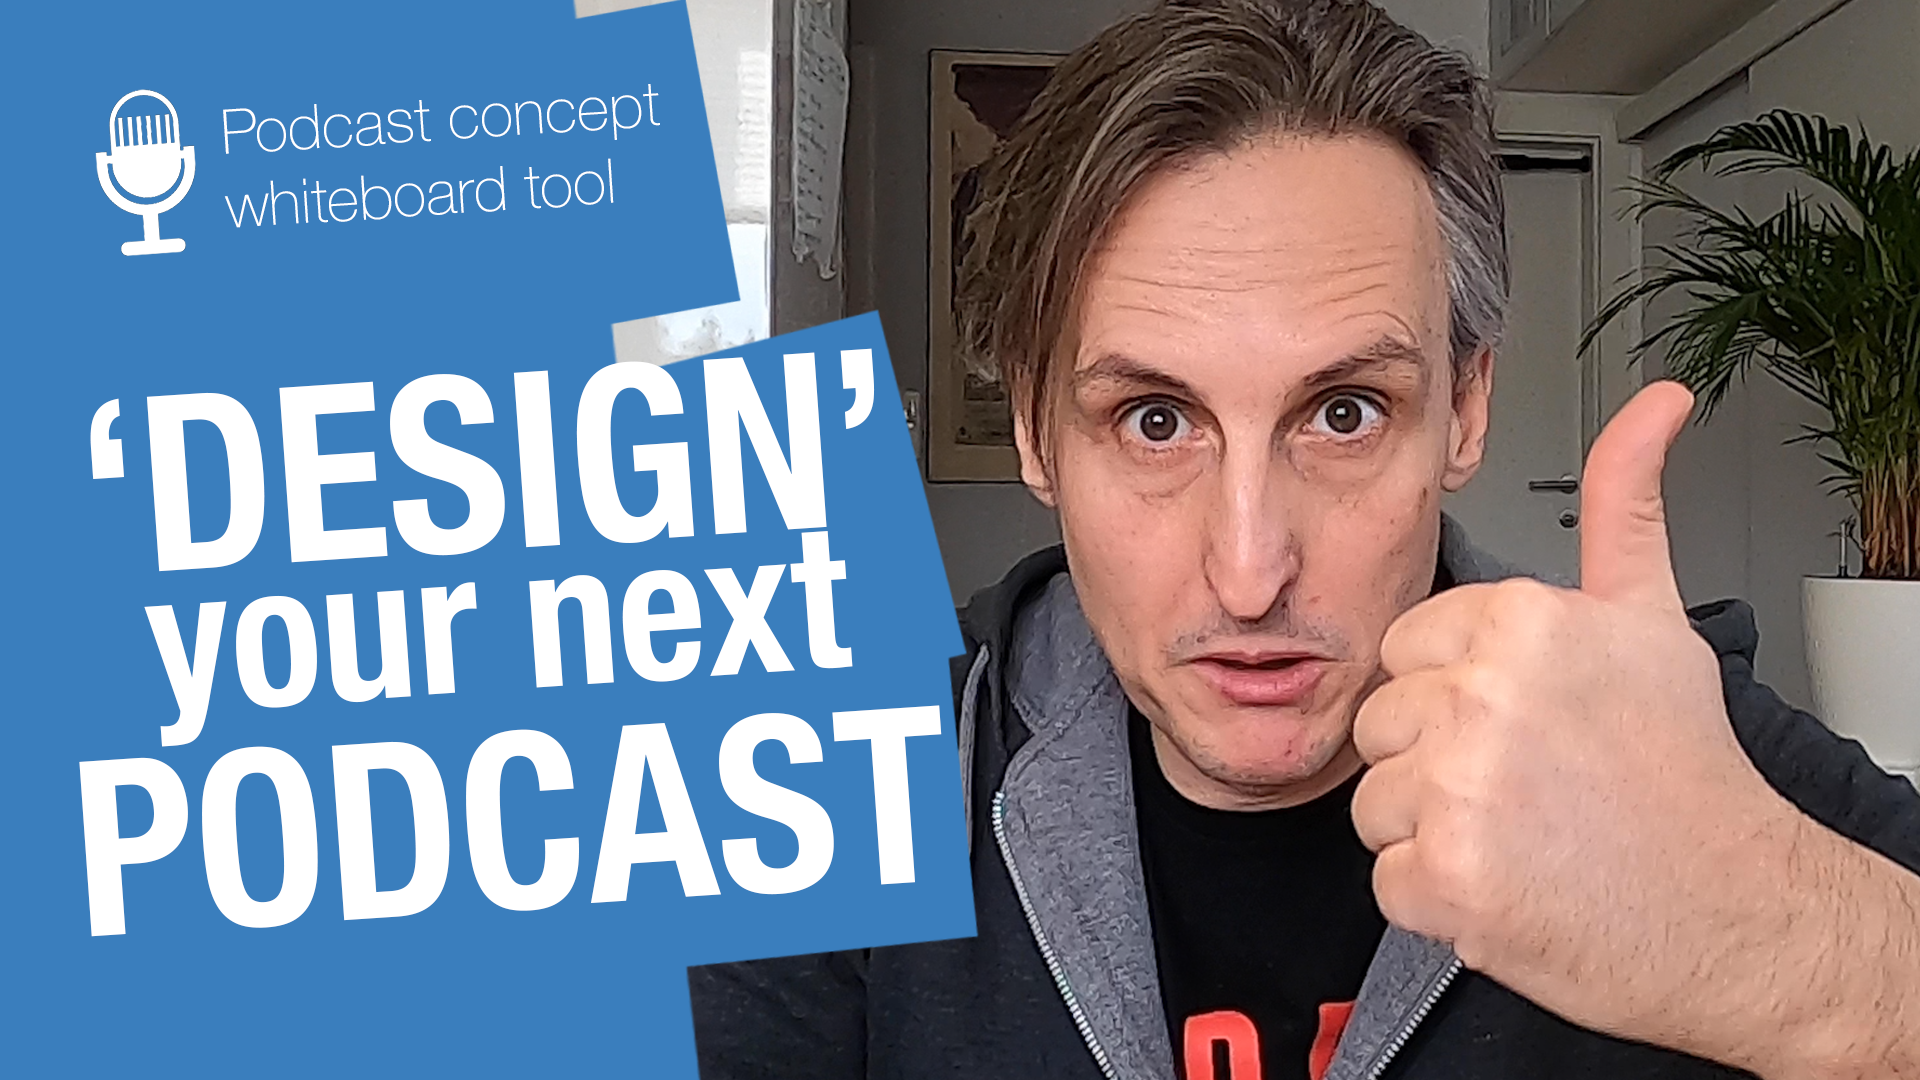 A structured approach to designing your podcast strategy